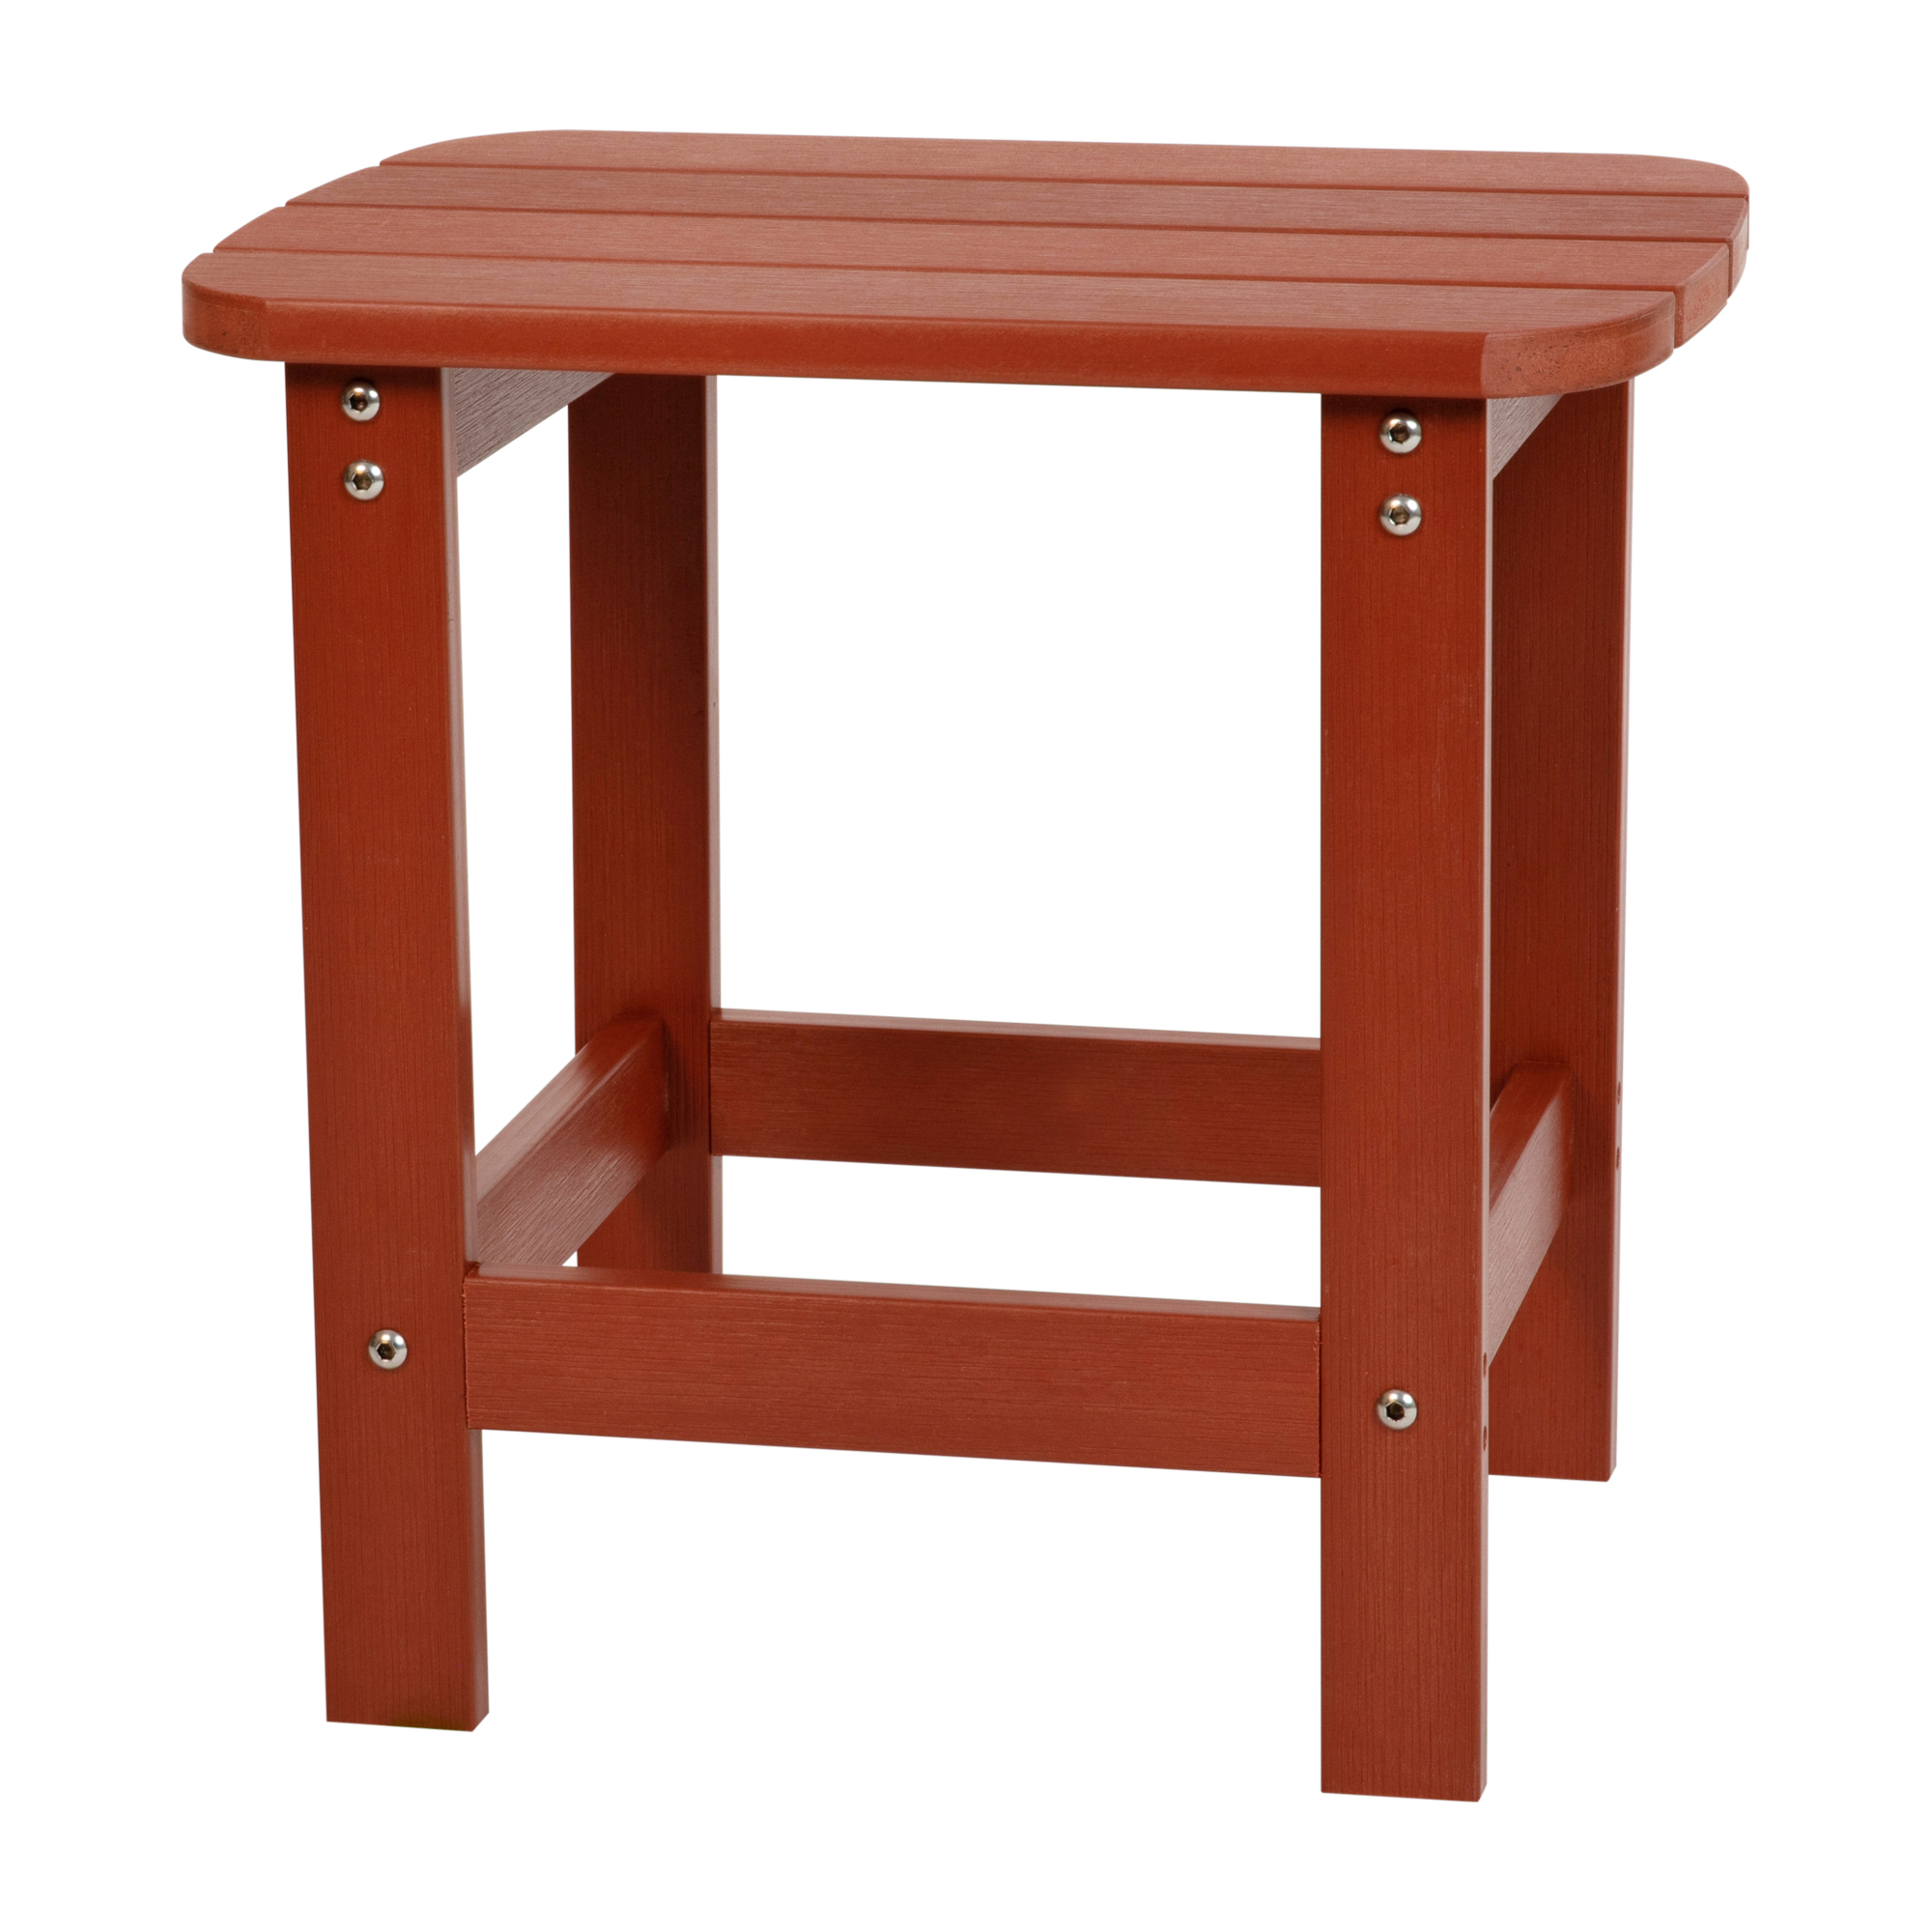 Flash Furniture, Red All-Weather Adirondack Side Table, Table Shape Rectangle, Primary Color Red, Height 18.25 in, Model JJT14001RED